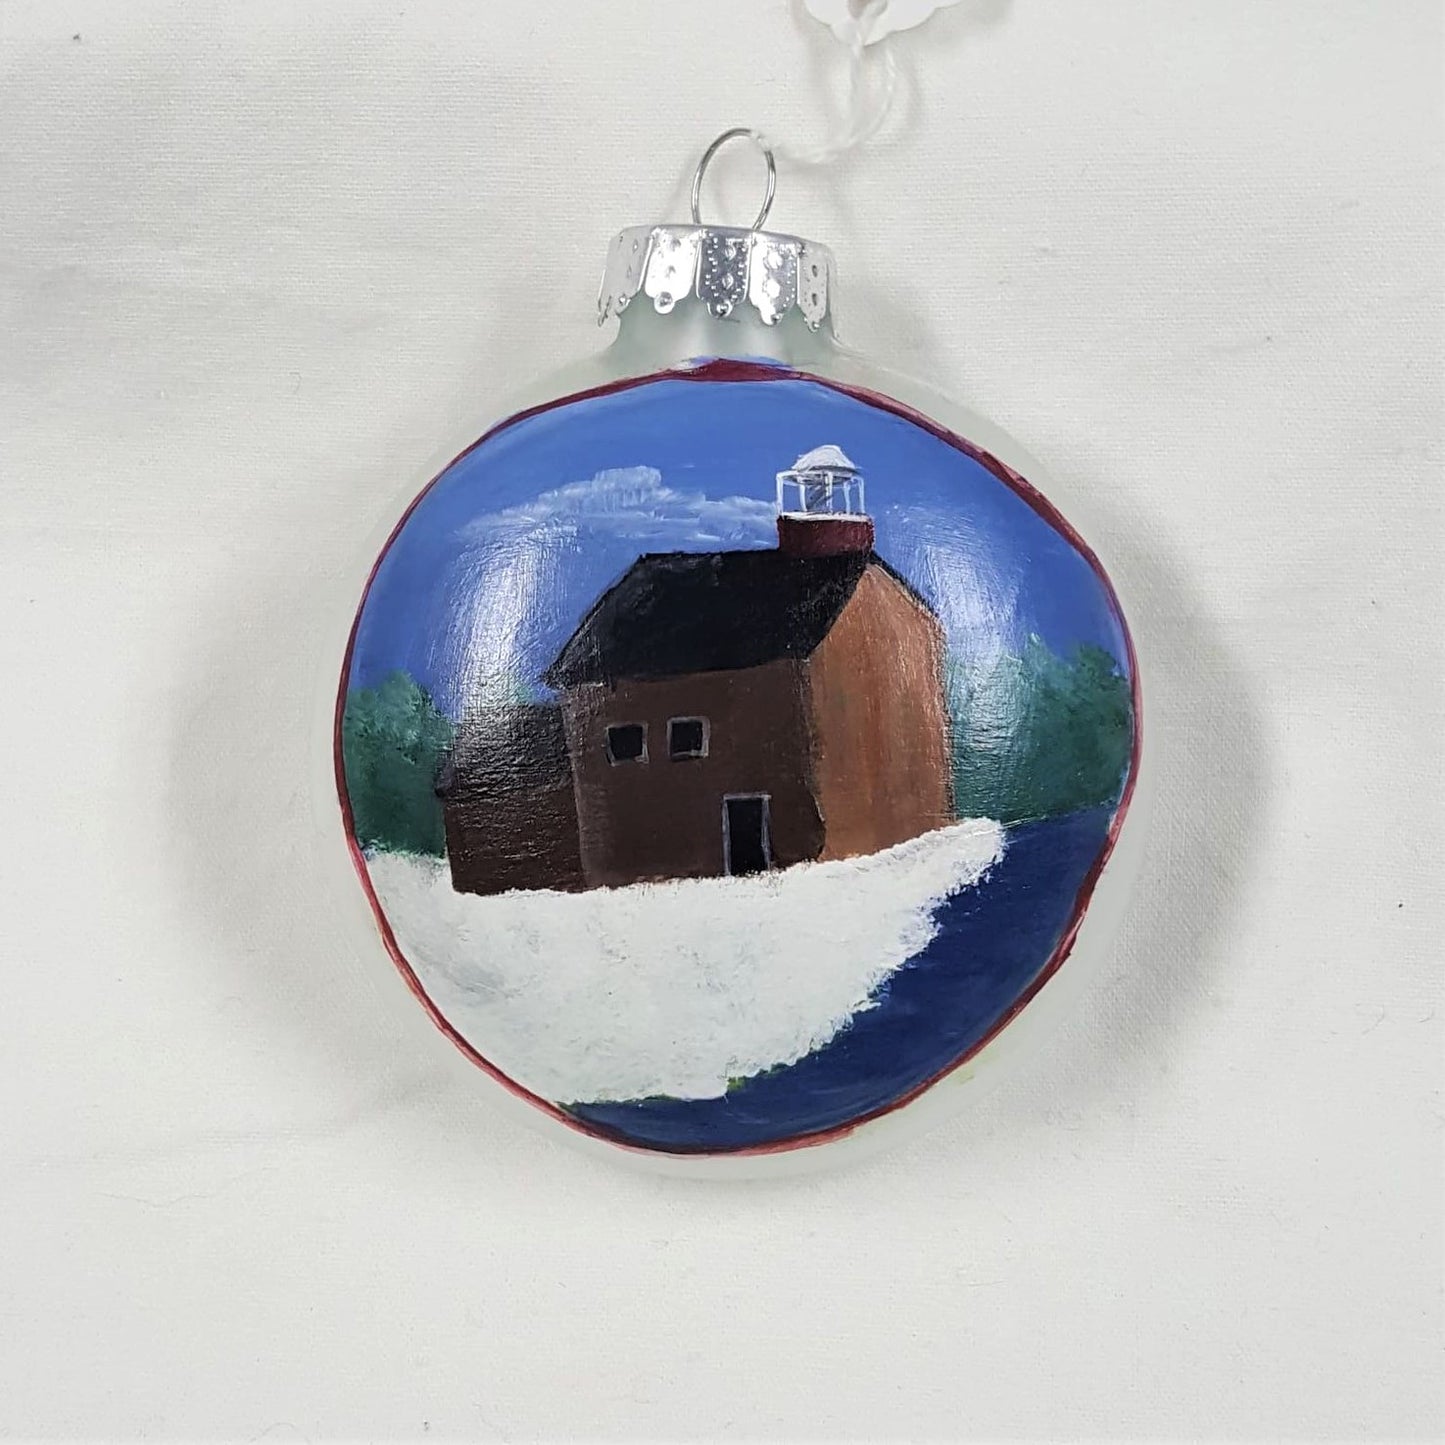 Holiday Ornament, handpainted glass